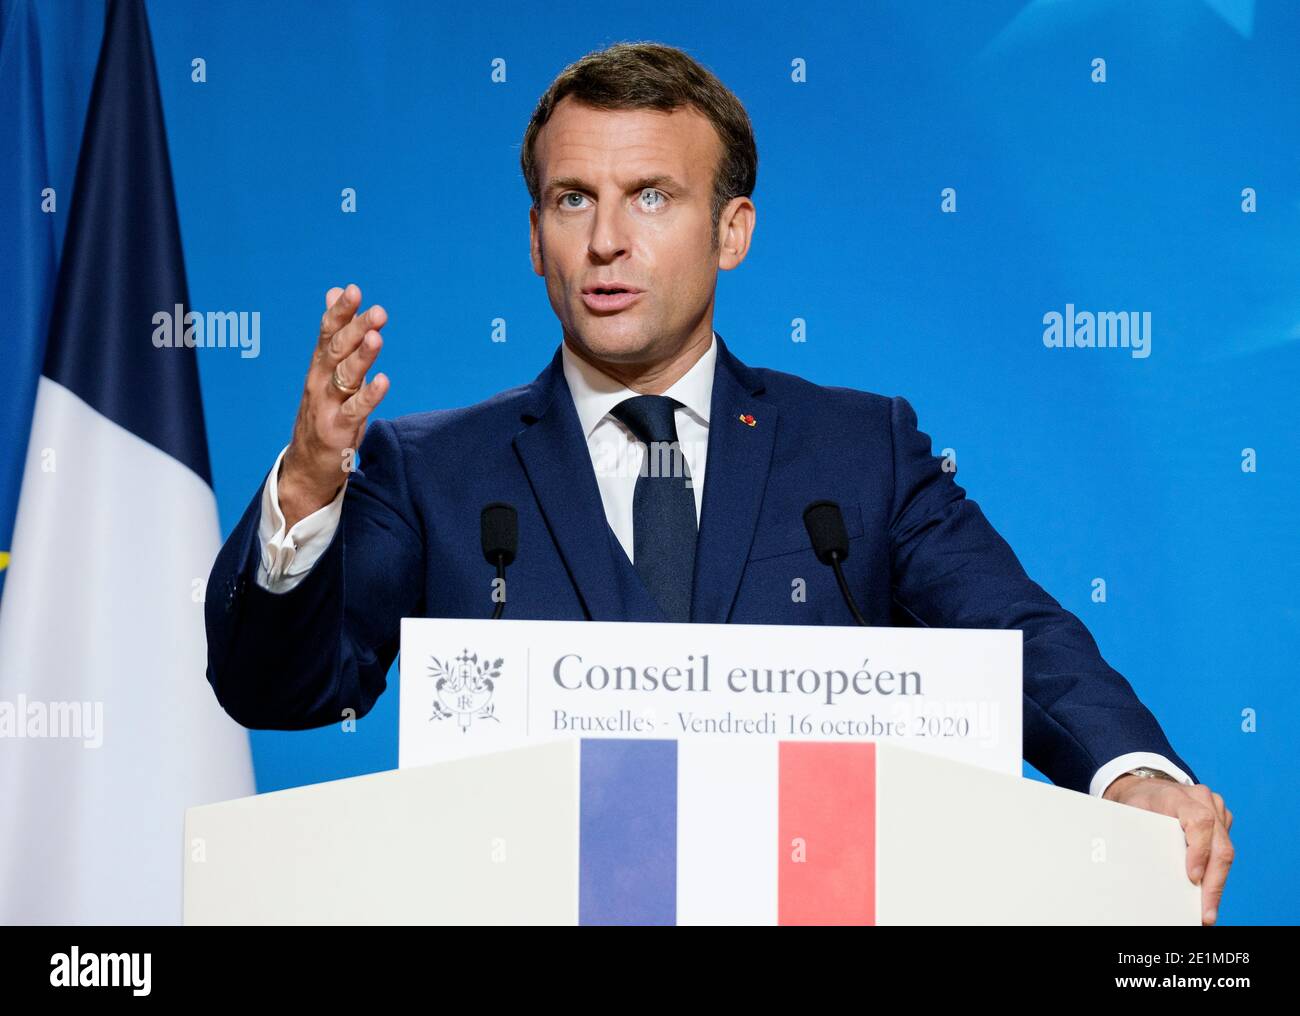 Belgium, Brussels, October 16, 2020: French President Emmanuel Macron during a press conference on the occasion of the special European Council relate Stock Photo